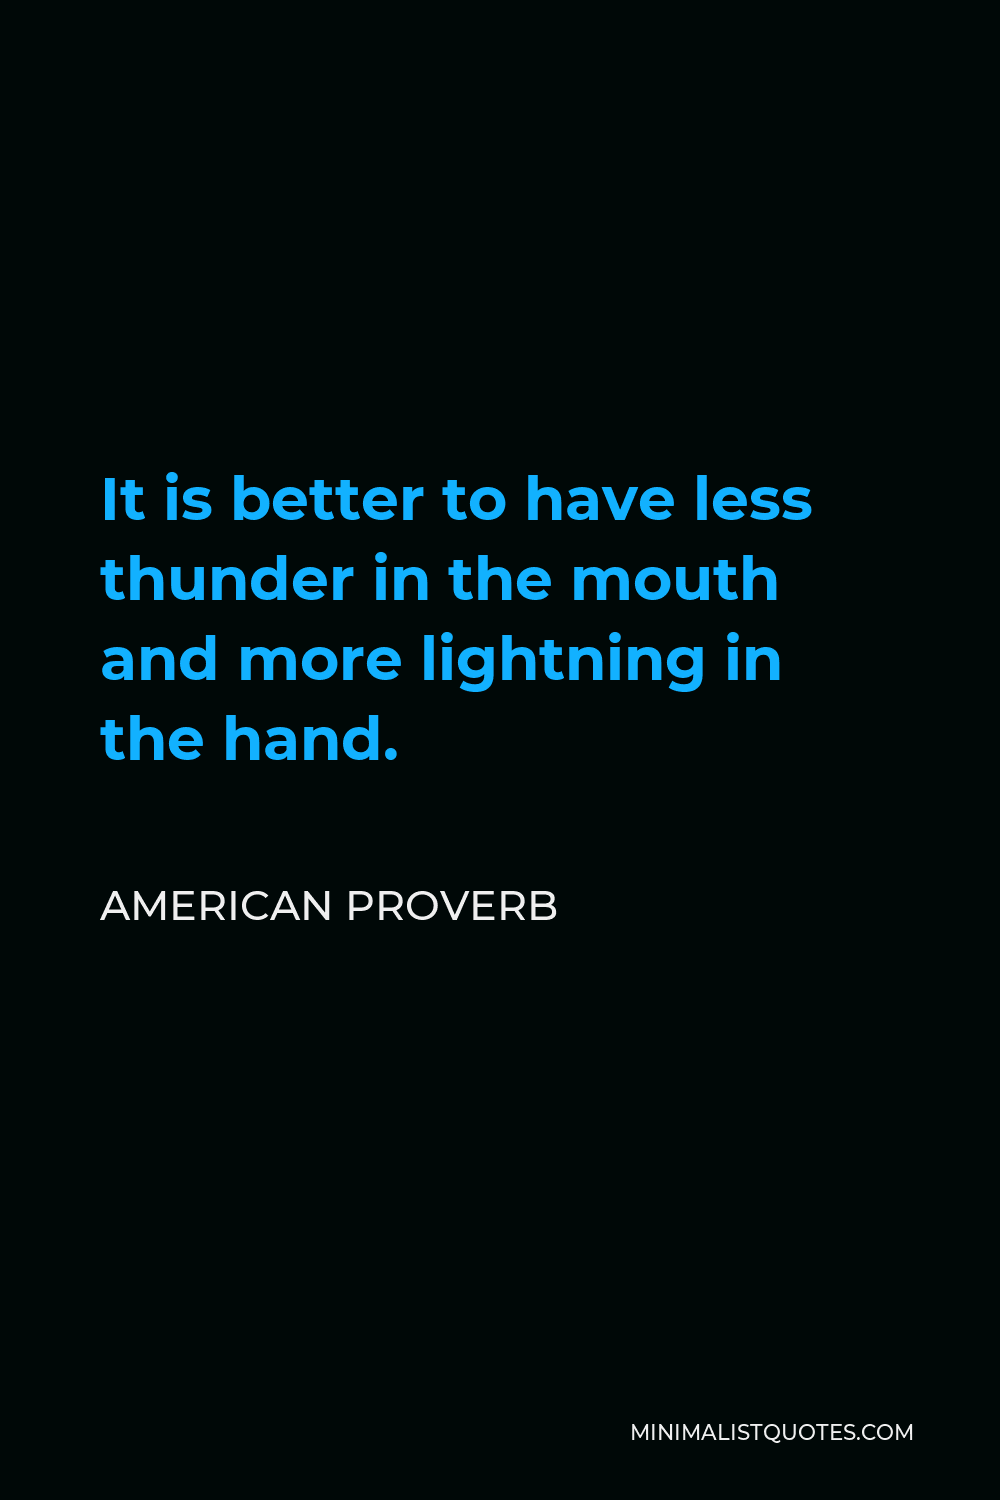 American Proverb Quote - It is better to have less thunder in the mouth and more lightning in the hand.